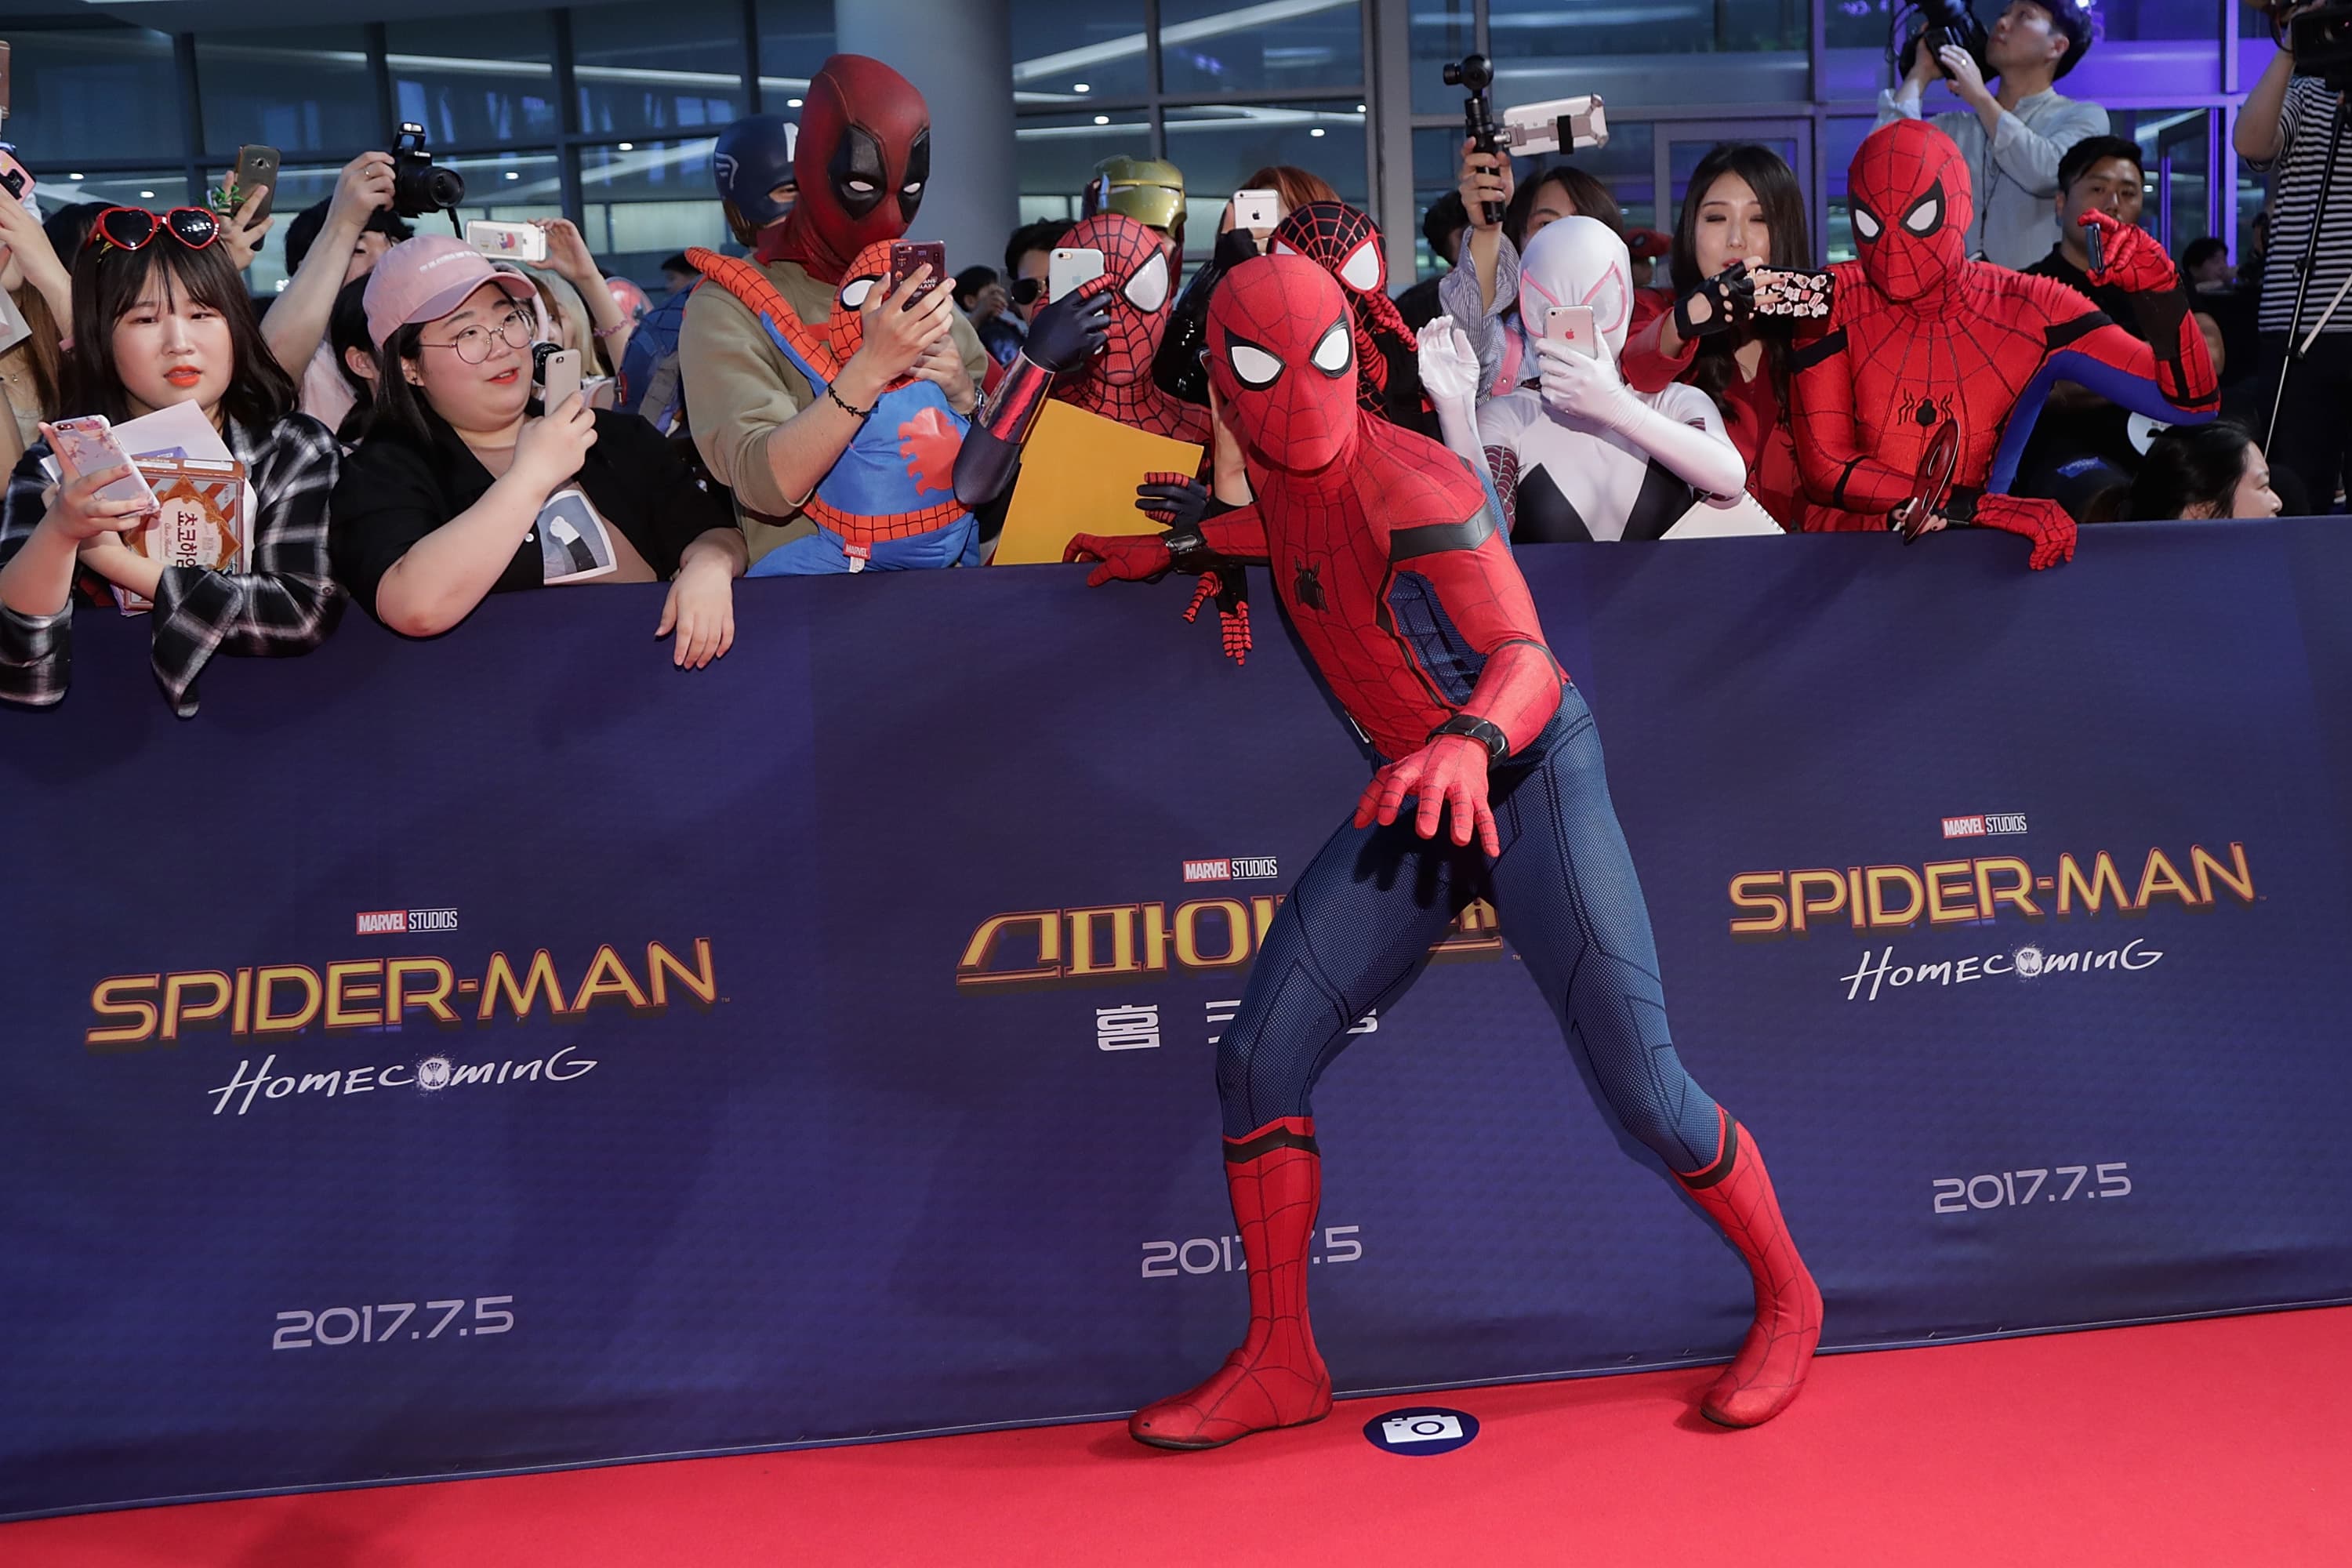 Hot Toys' 'Spider-Man Homecoming' Figures Do Whatever a Spider Can